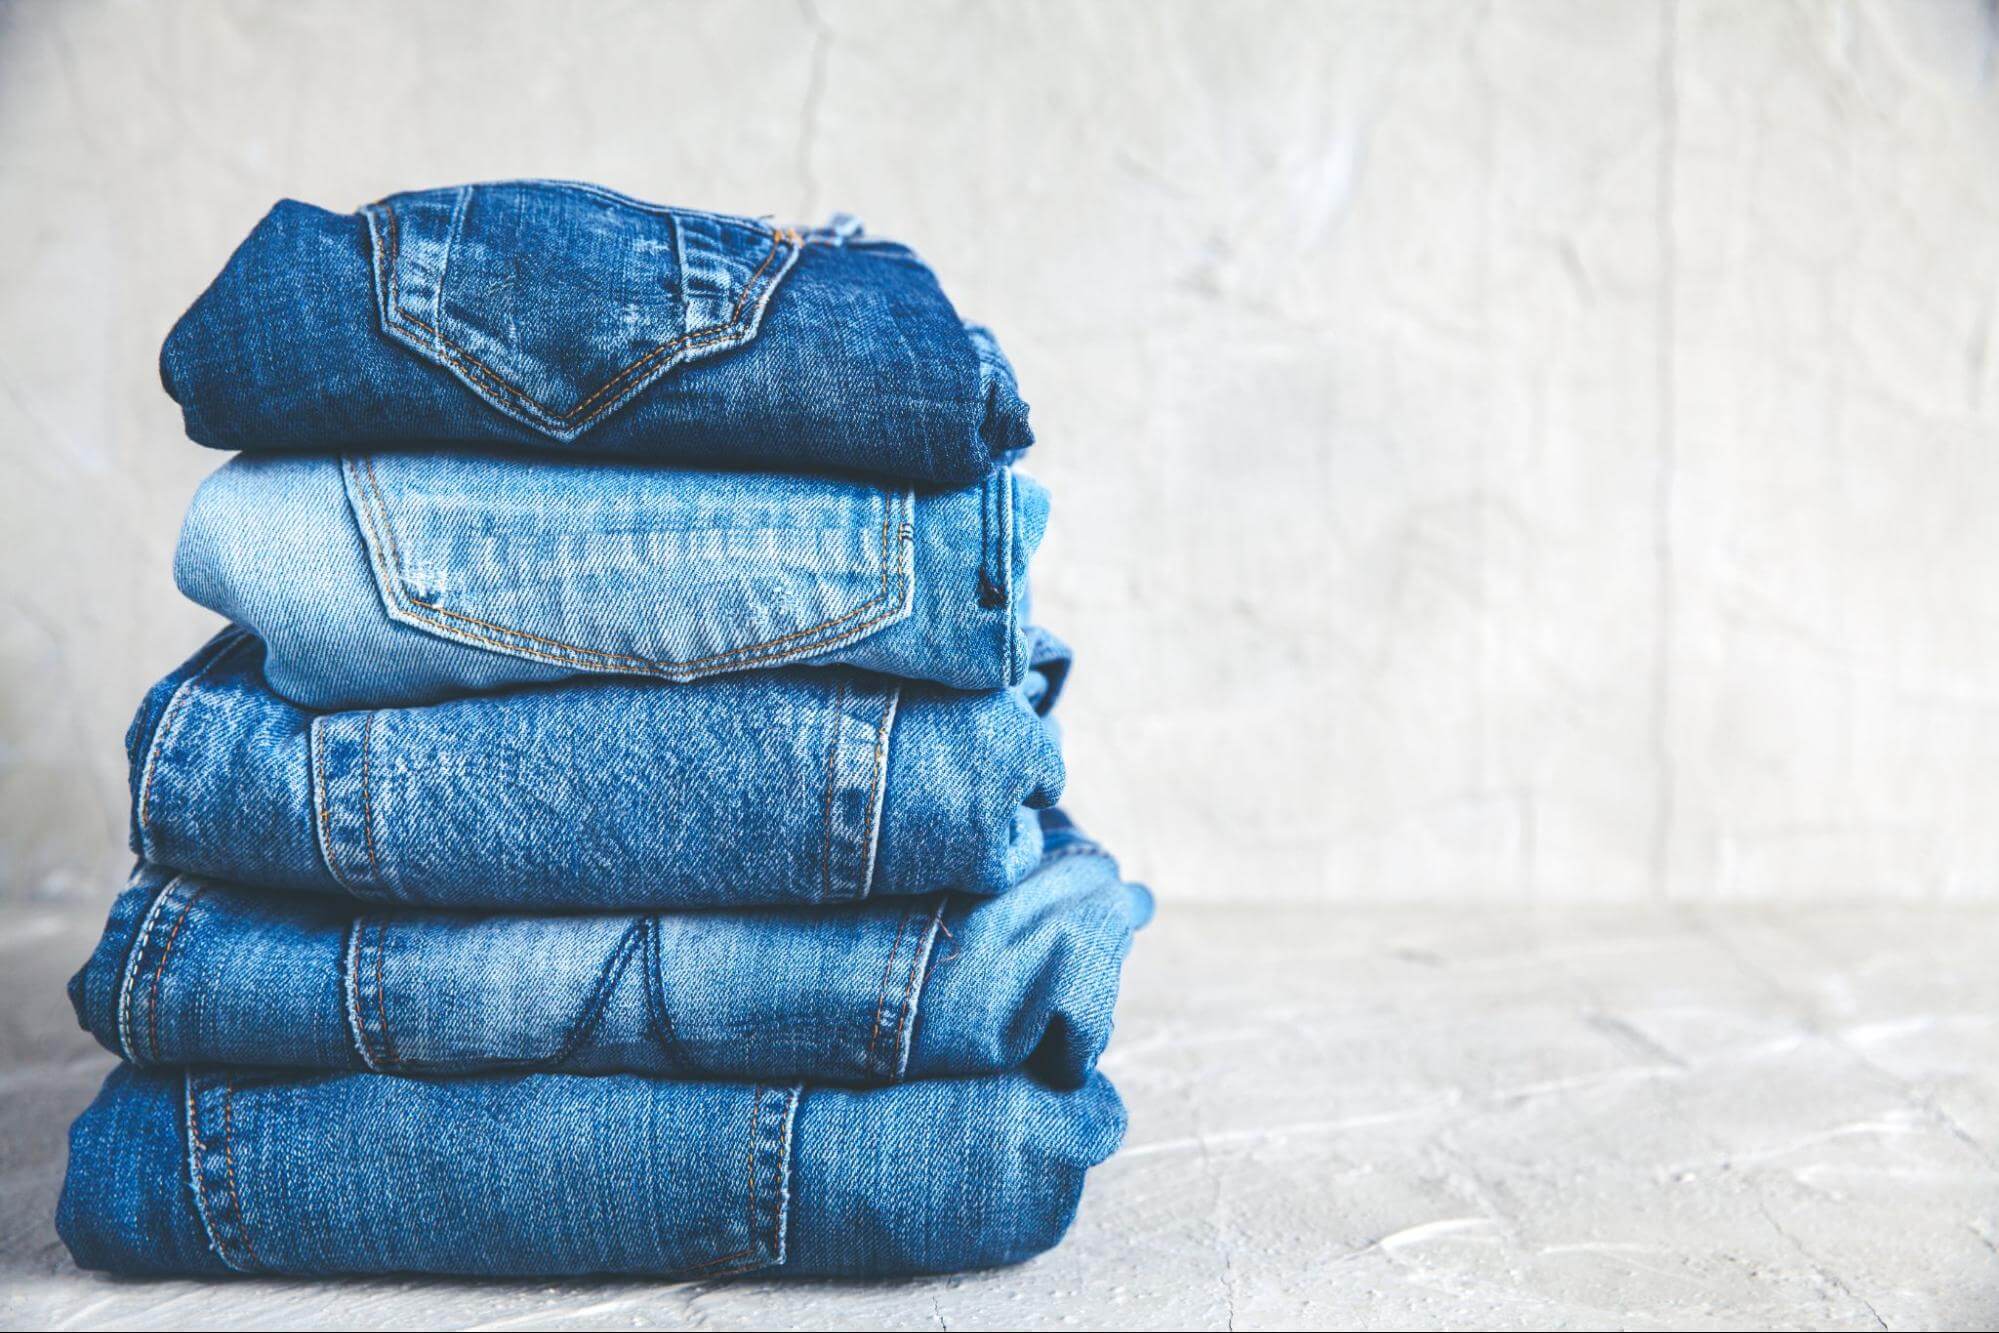 Which jeans to choose according to your body type?